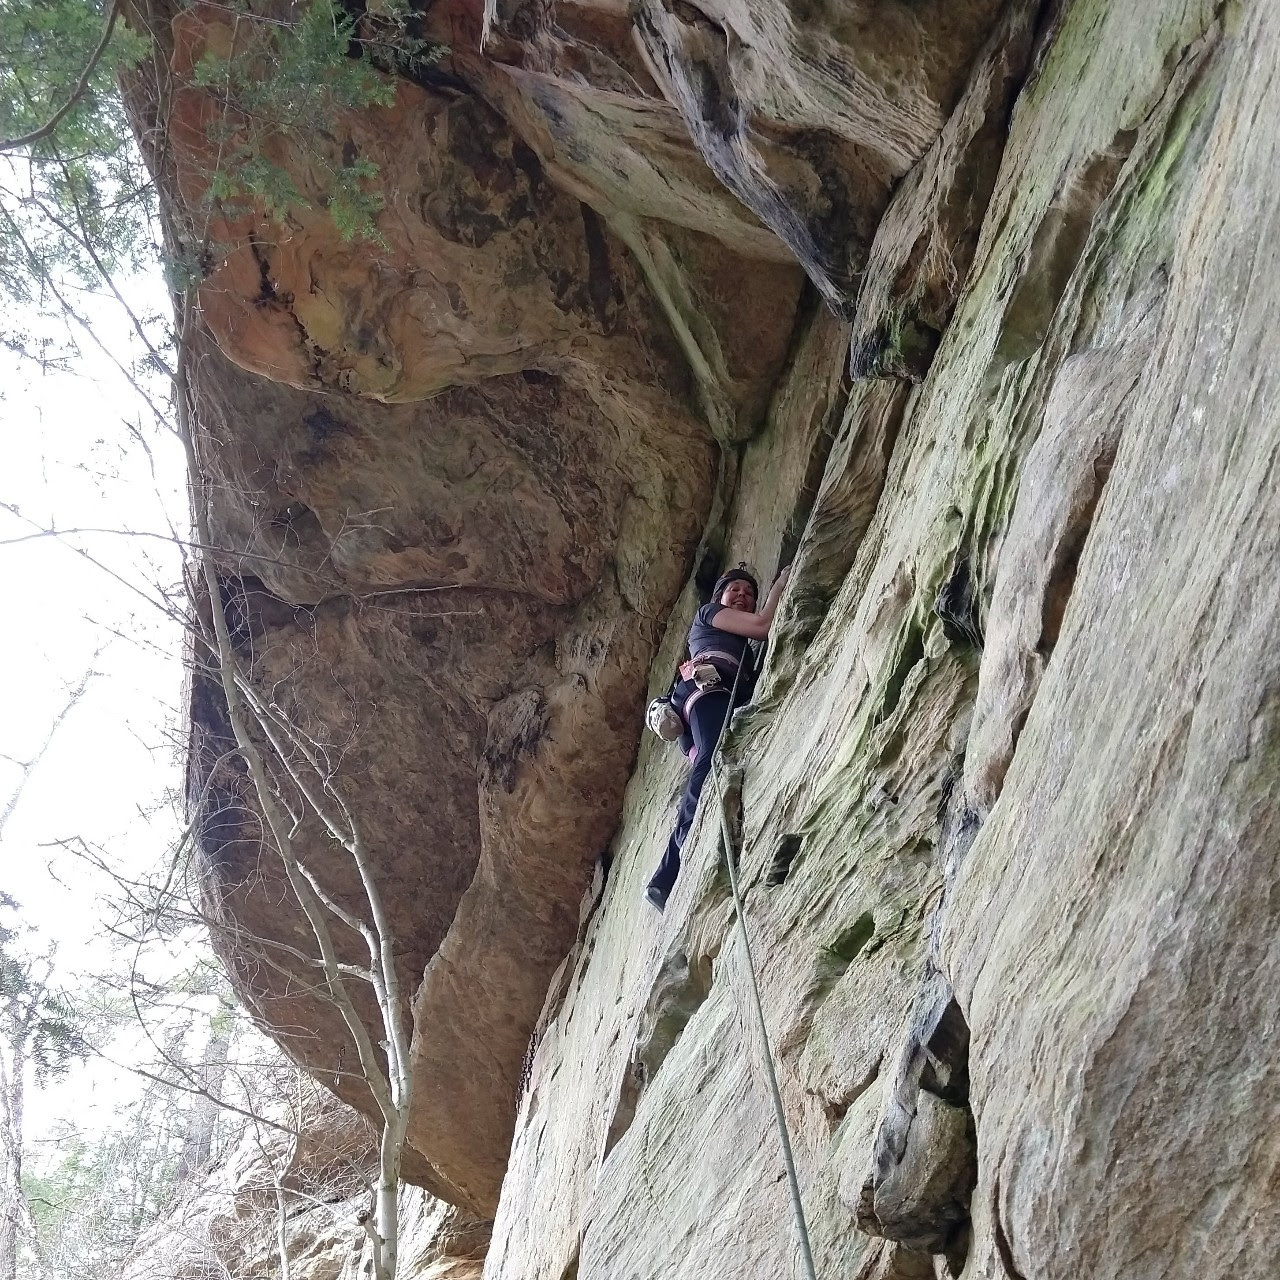 Sally at Red River Gorge